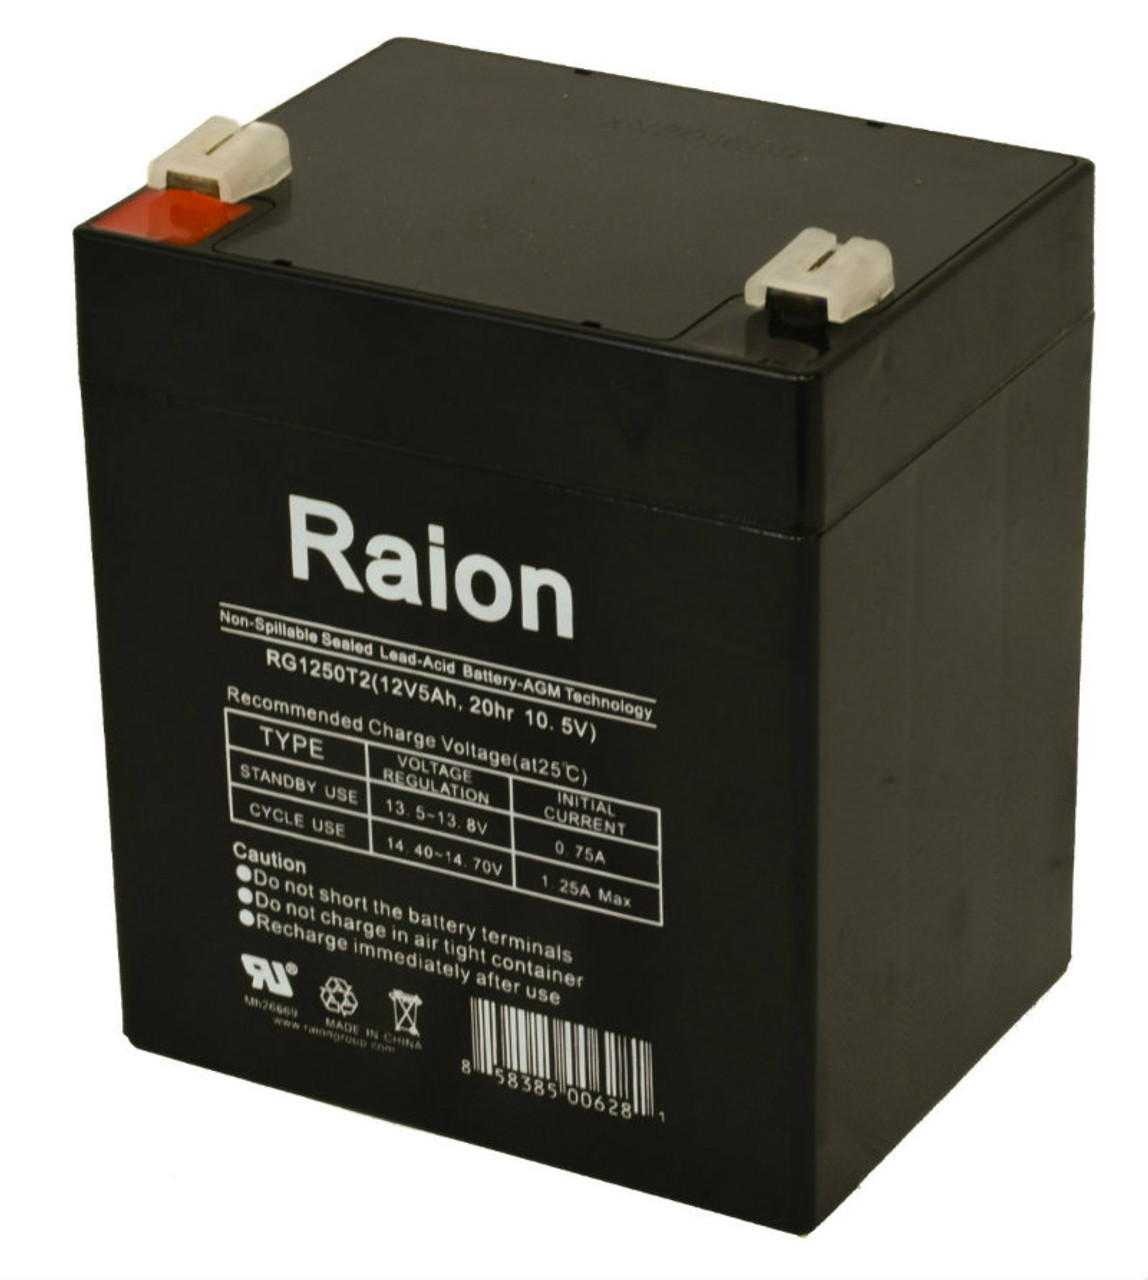 Raion Power RG1250T1 Replacement Battery for Mizuho OSI 5892 Surgical Table-Top